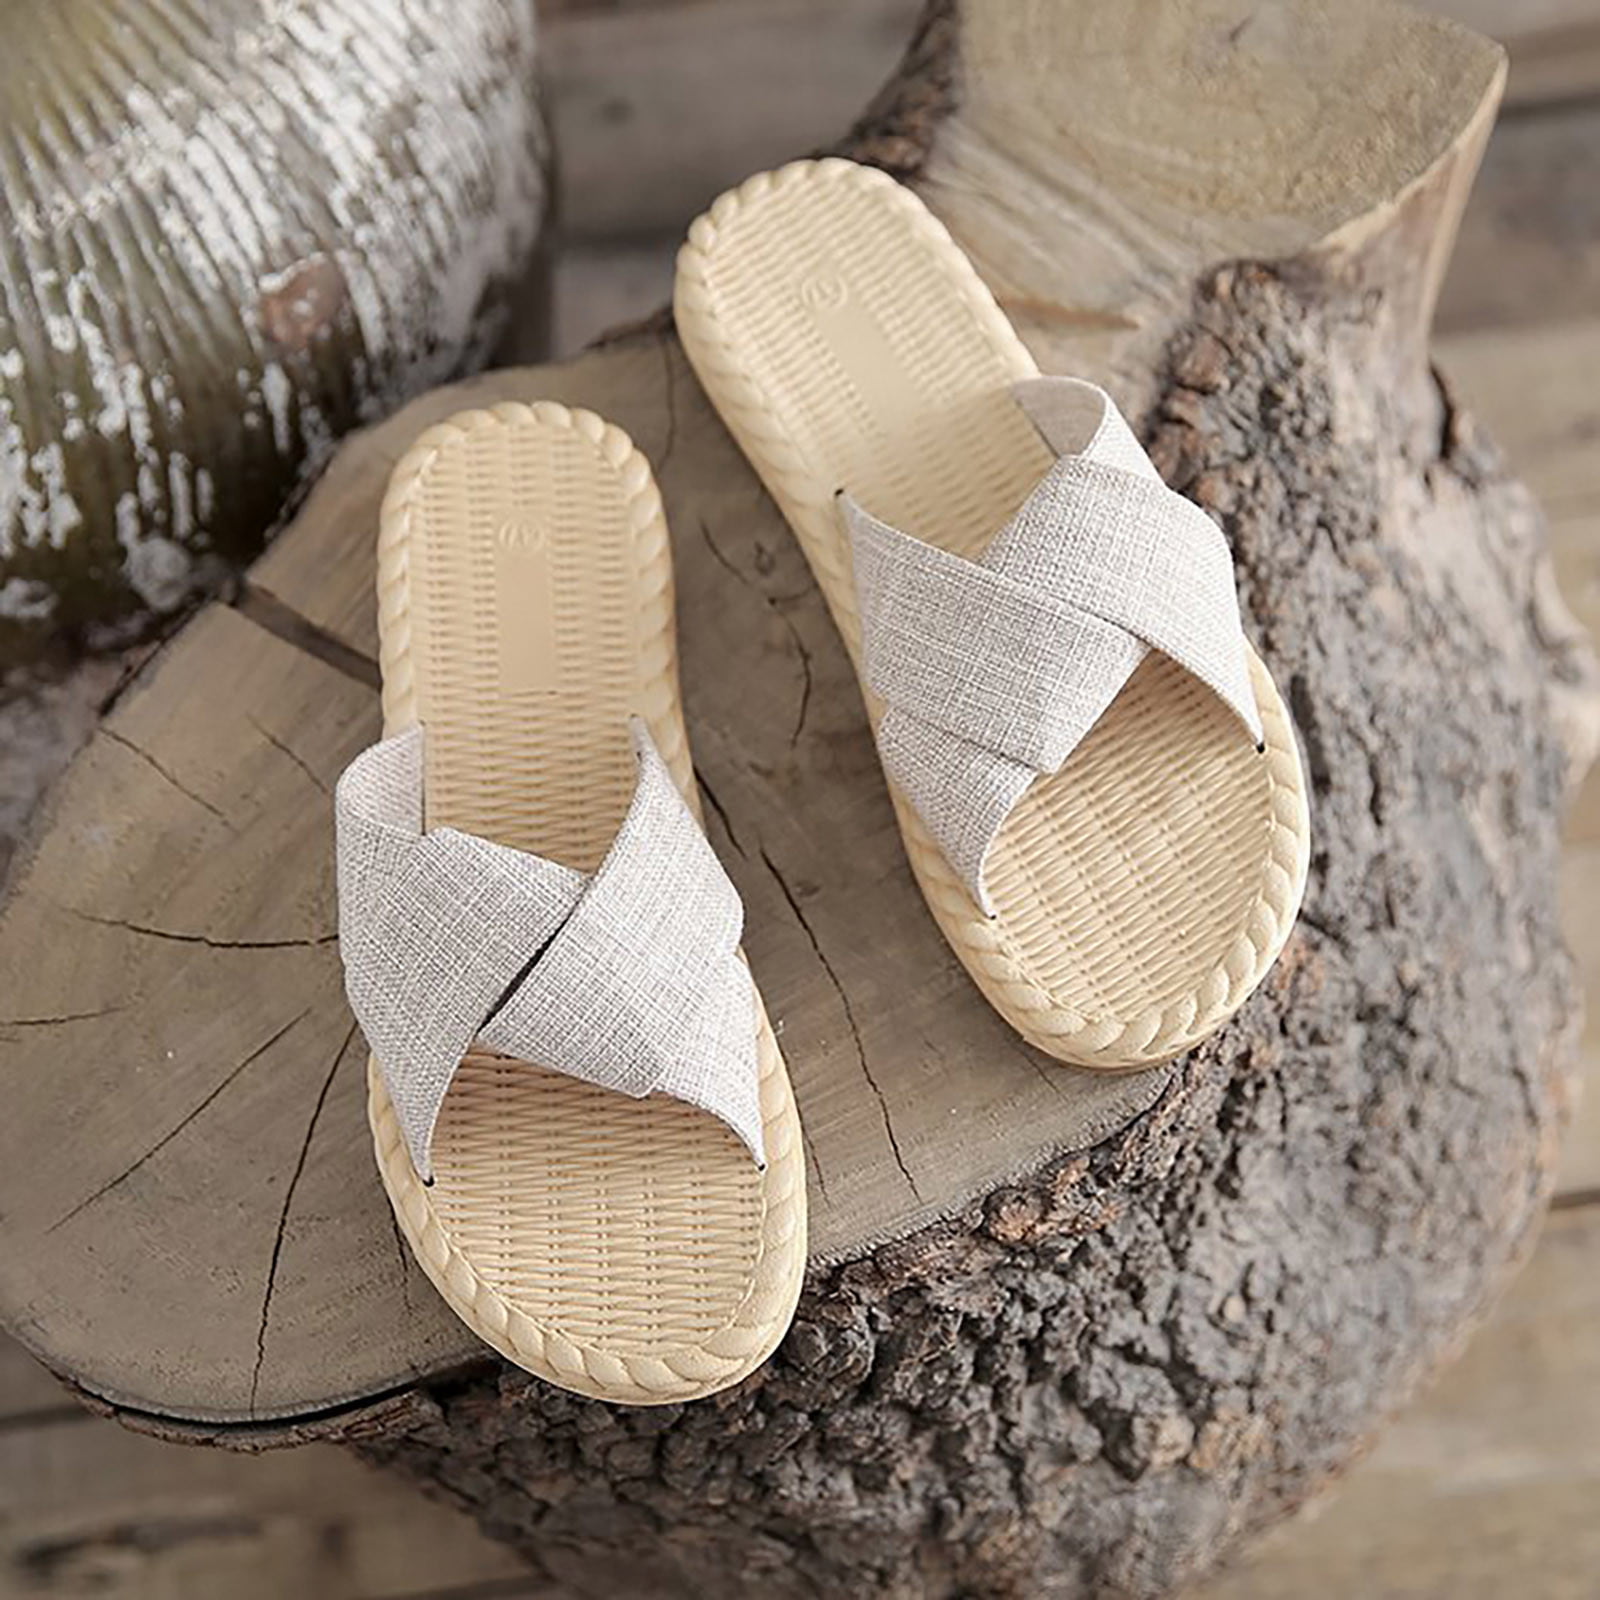 Slippers Summer Slipper Home Shoes Indoor Sandals Sandal Ladies Linen Bow  Bowknot Socks Heated Casual Beach Party Flops - Walmart.com